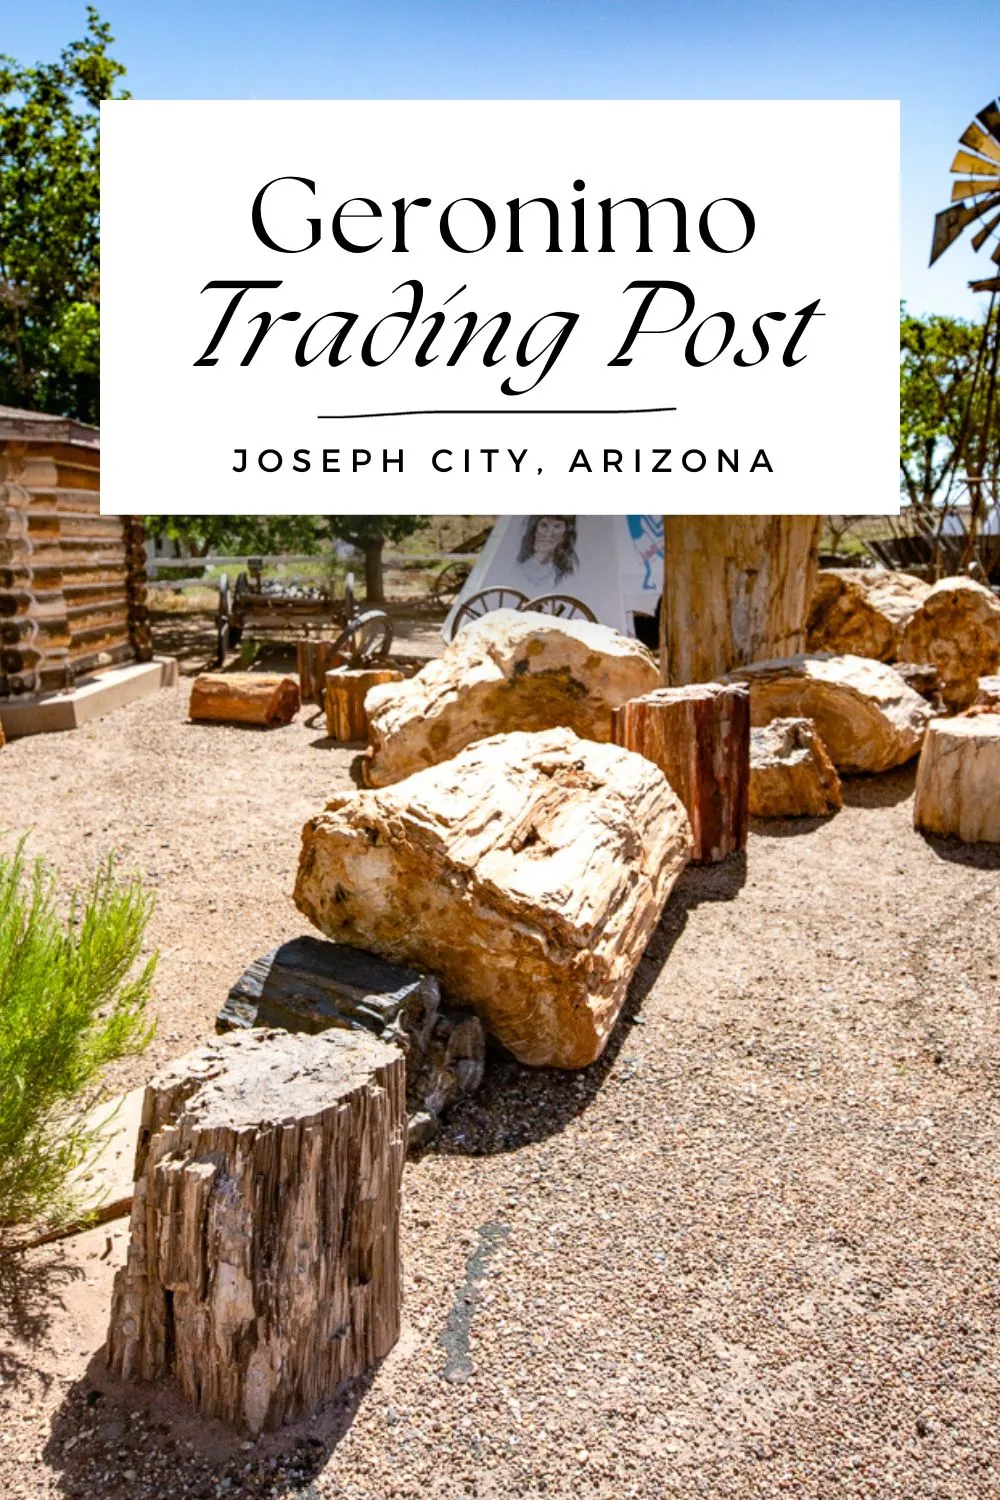 Geronimo Trading Post in Joseph City, Arizona has been open since 1974. Inside find Route 66 souvenirs alongside local crafts and other unique mementos. Outside find petrified trees, teepees, big pottery, and the World's Largest Petrified Tree. Find the 80-ton, ten-foot tall stump in several pieces among the other miscellany outside. Visit this Route 66 roadside attraction on your Arizona road trip! #Route66 #Route66RoadTrip #RoadsideAttraction #ArizonaRoadTrip #Arizona